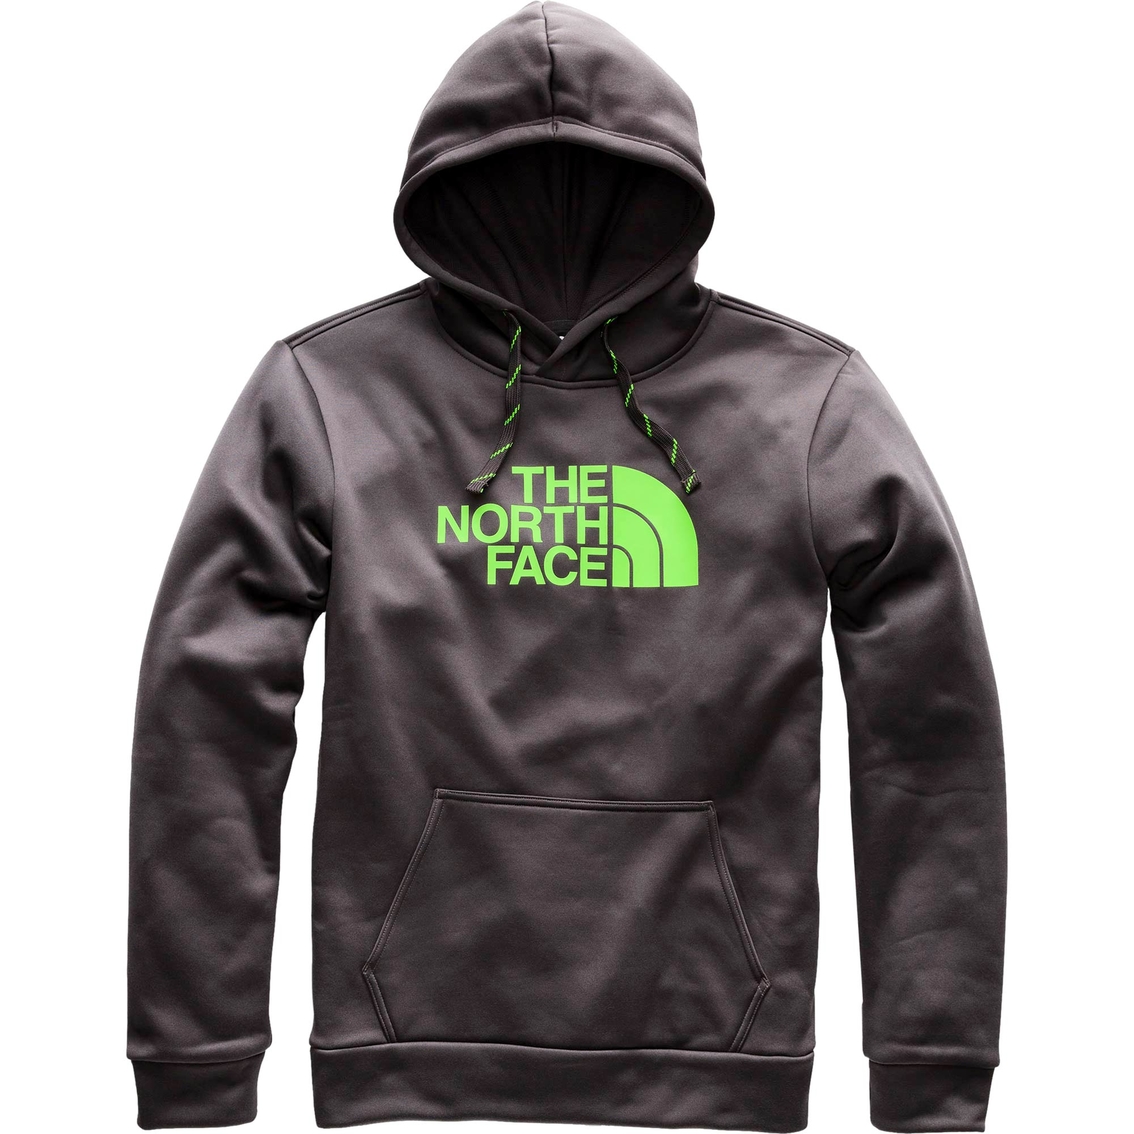 The North Face Surgent Half Dome Hoodie | Shirts | Clothing ...